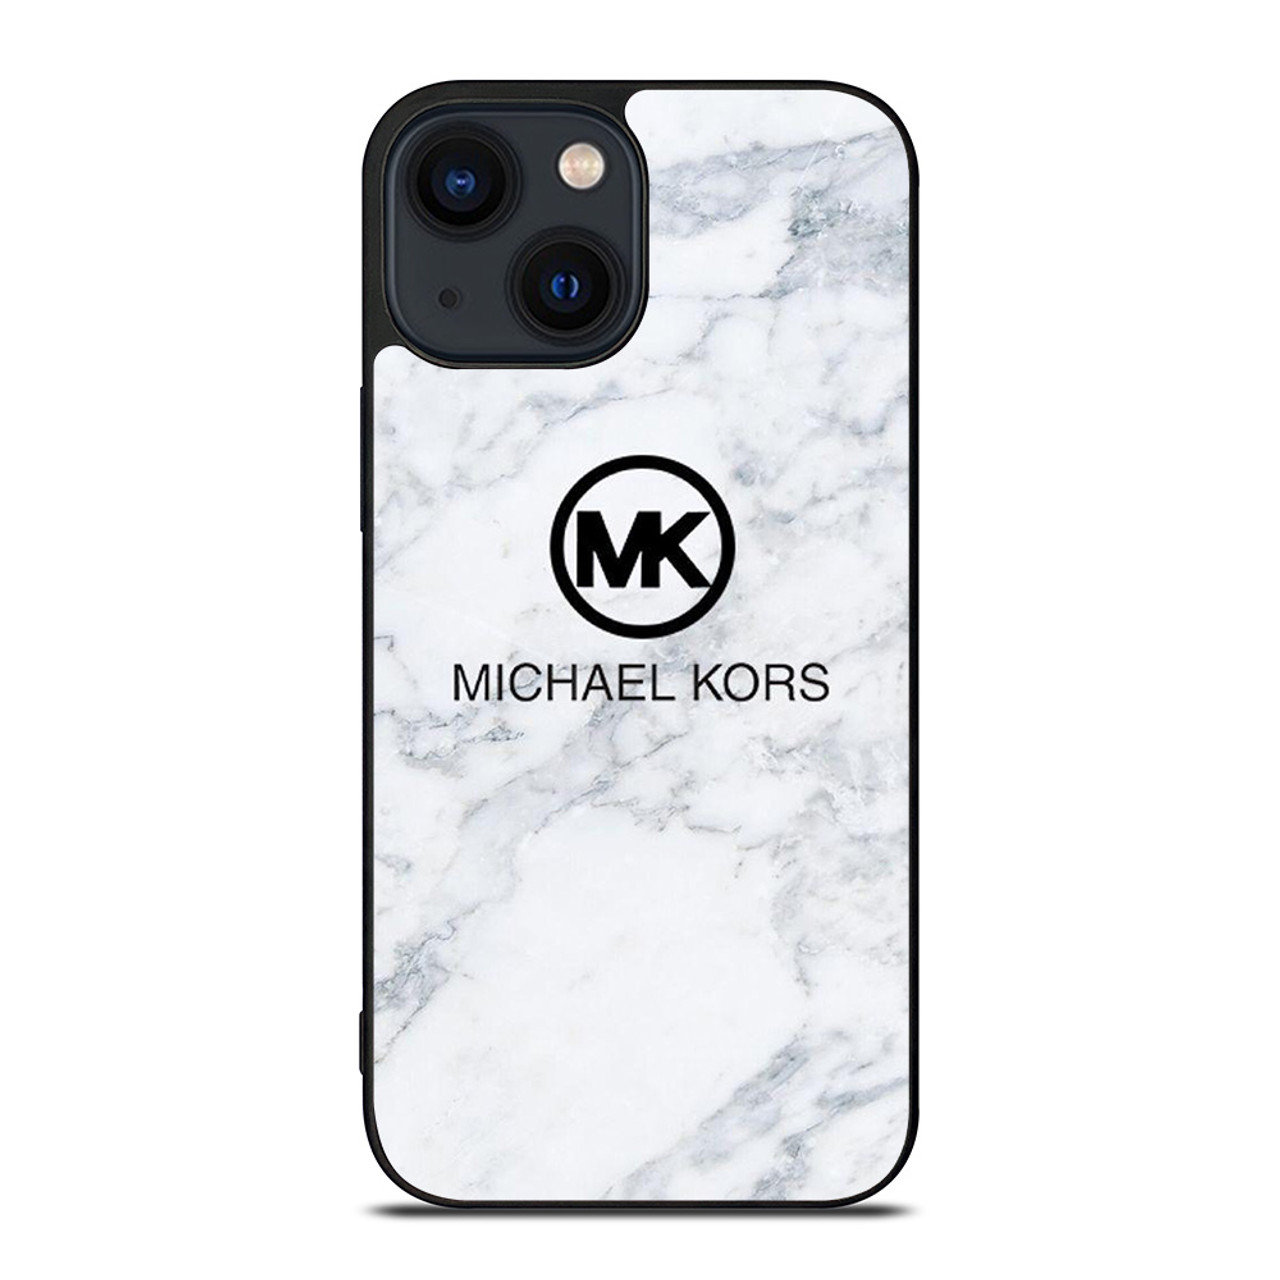 Michael Kors iPhone plus phone case for Sale in Columbus OH  OfferUp